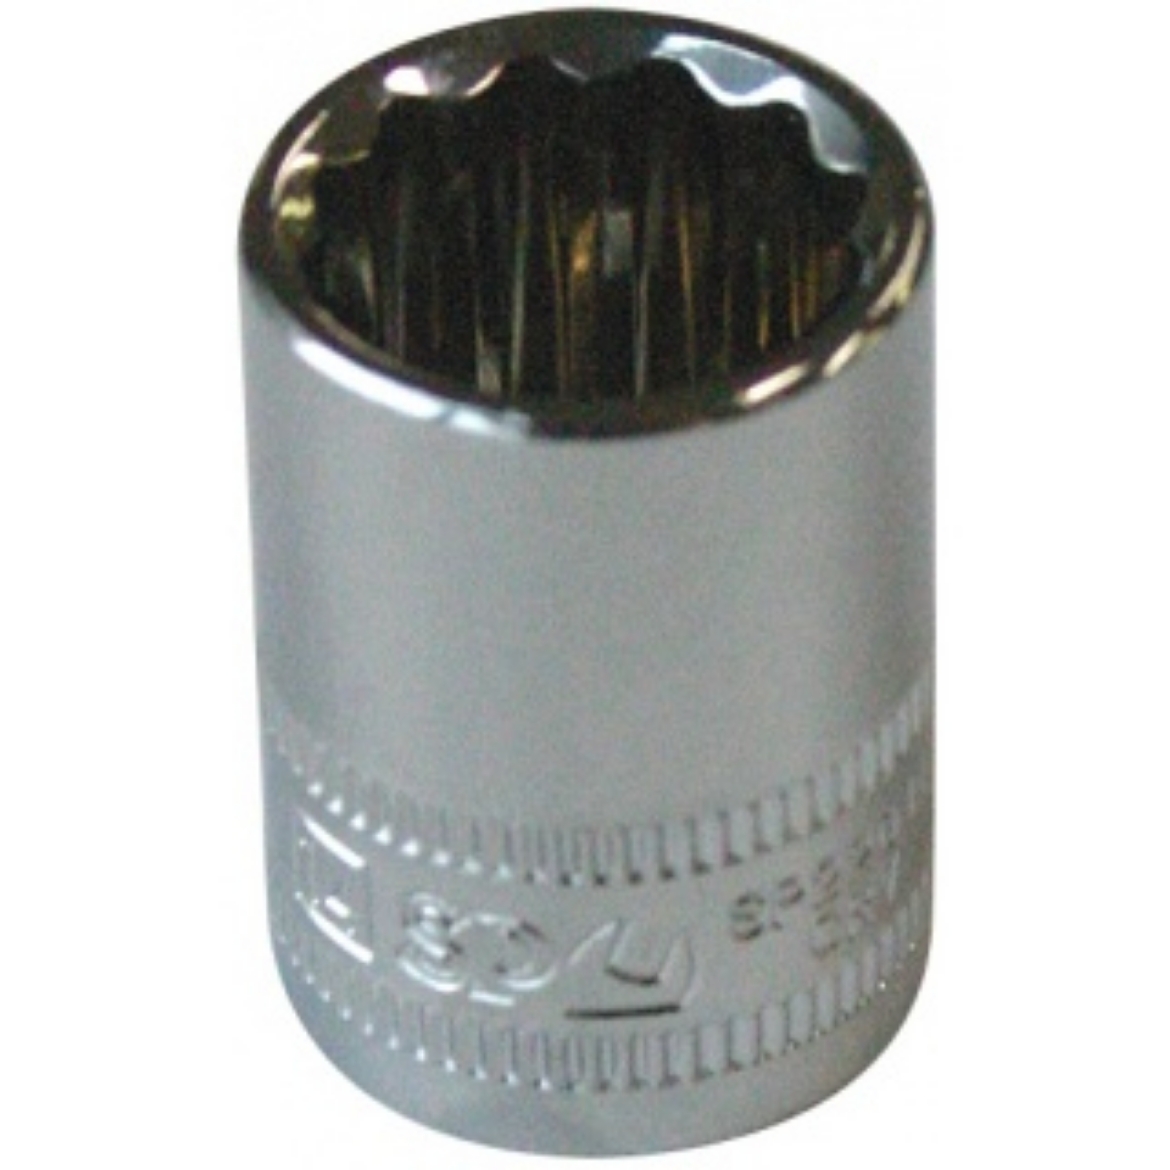 Picture of SOCKET 3/8"DR 12PT METRIC 17MM SP TOOLS